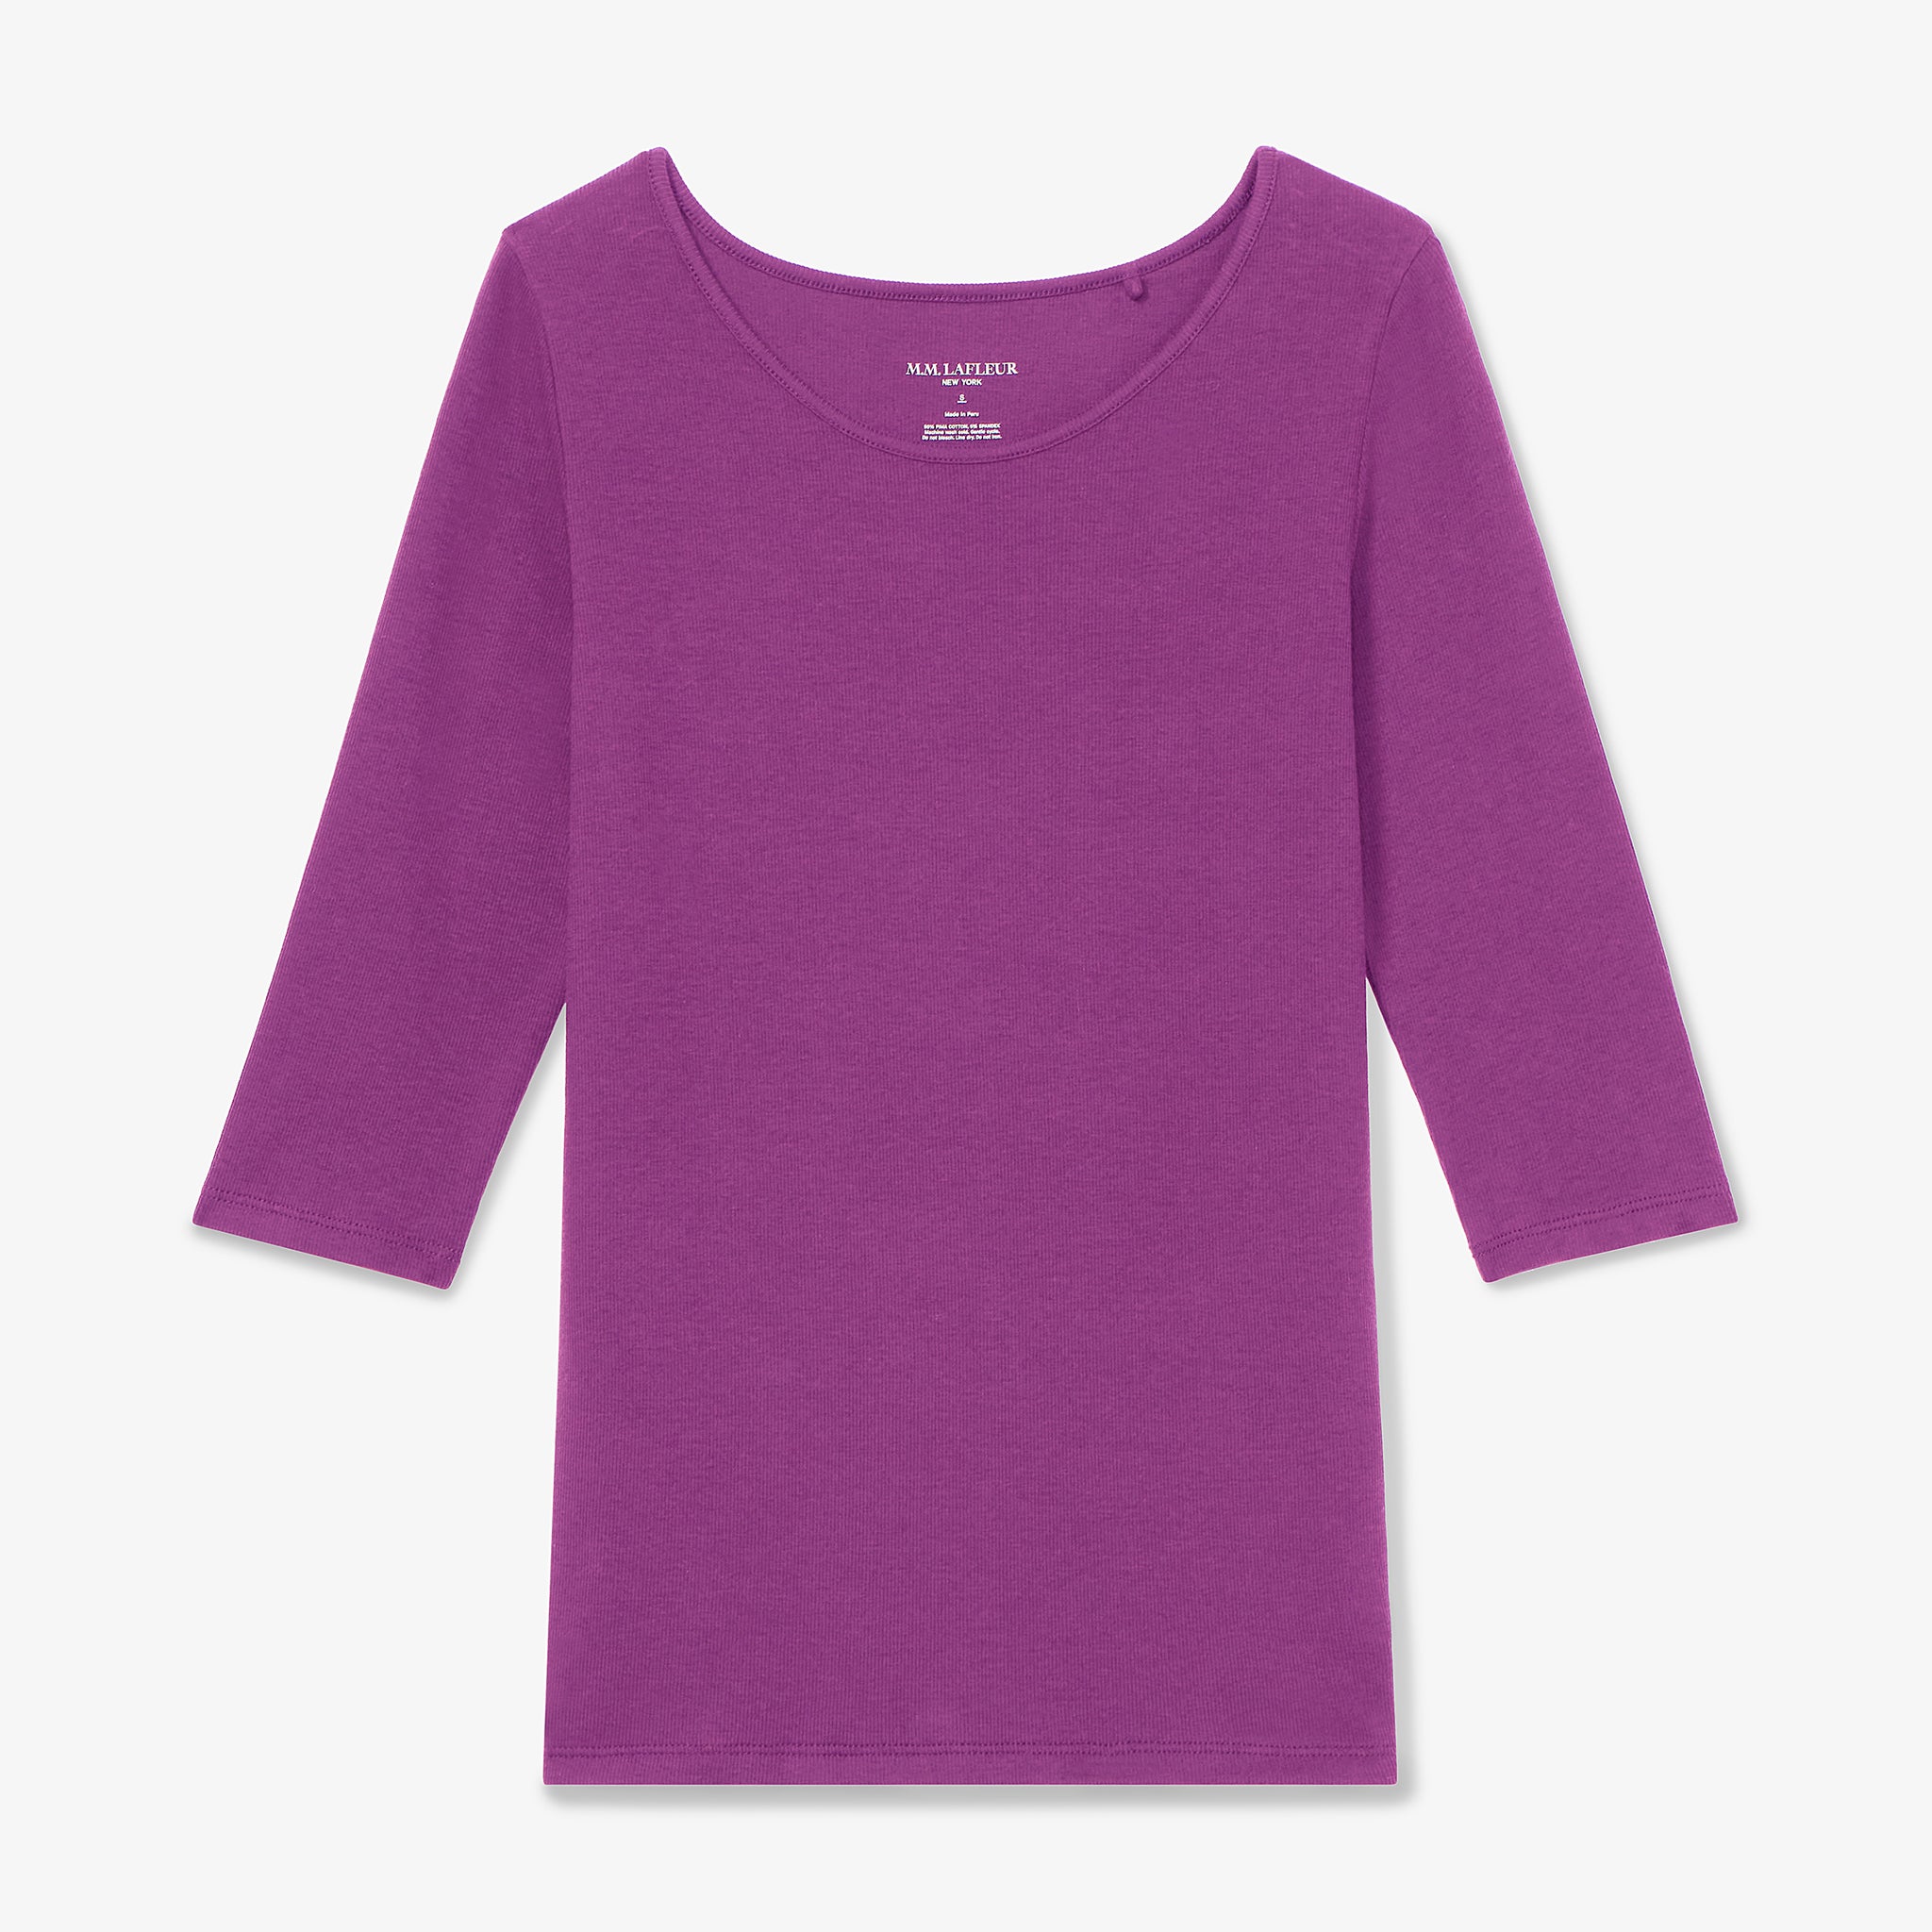 Packshot image of the Soyoung Top  in Purple Jasper